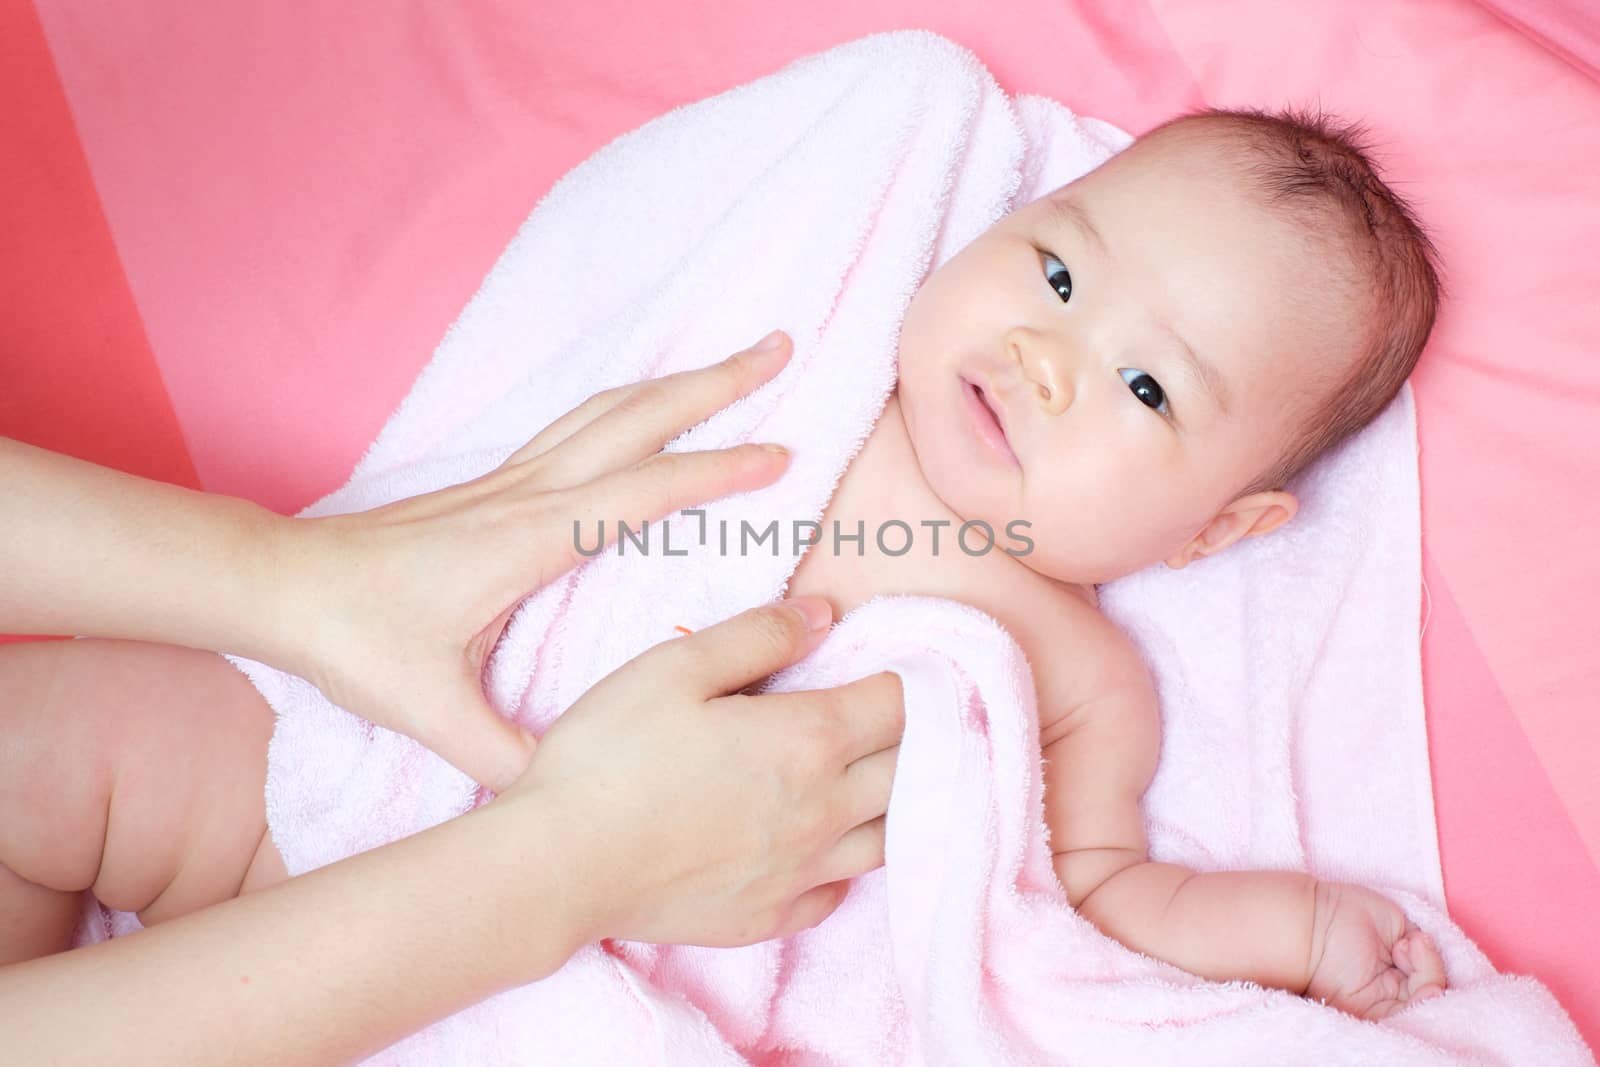 Mom rub her baby to dry whit pink towel